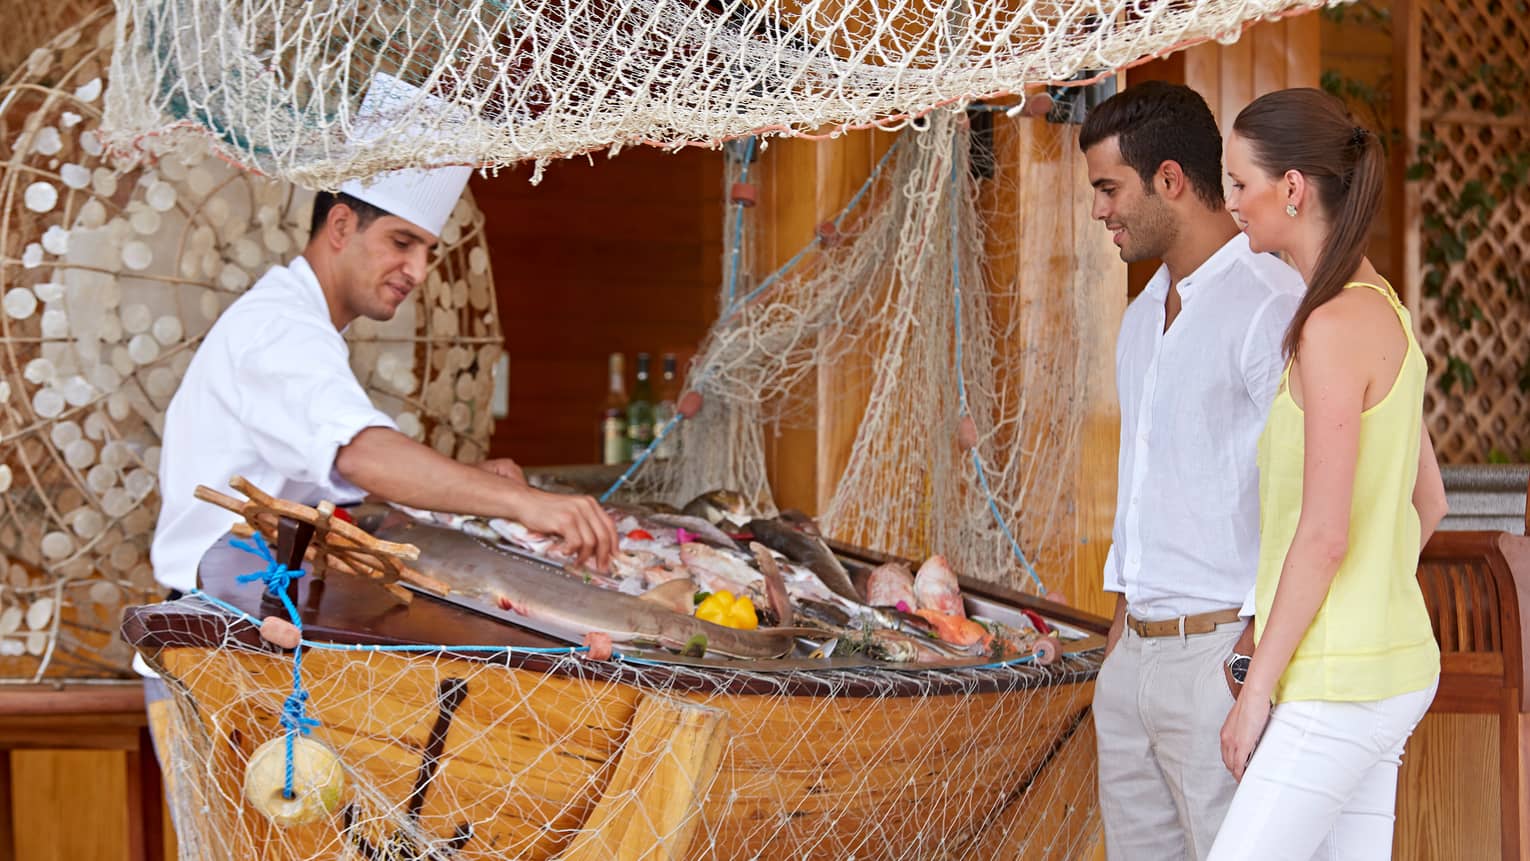 Reef Grill chef in hat displays fresh seafood on ice for couple